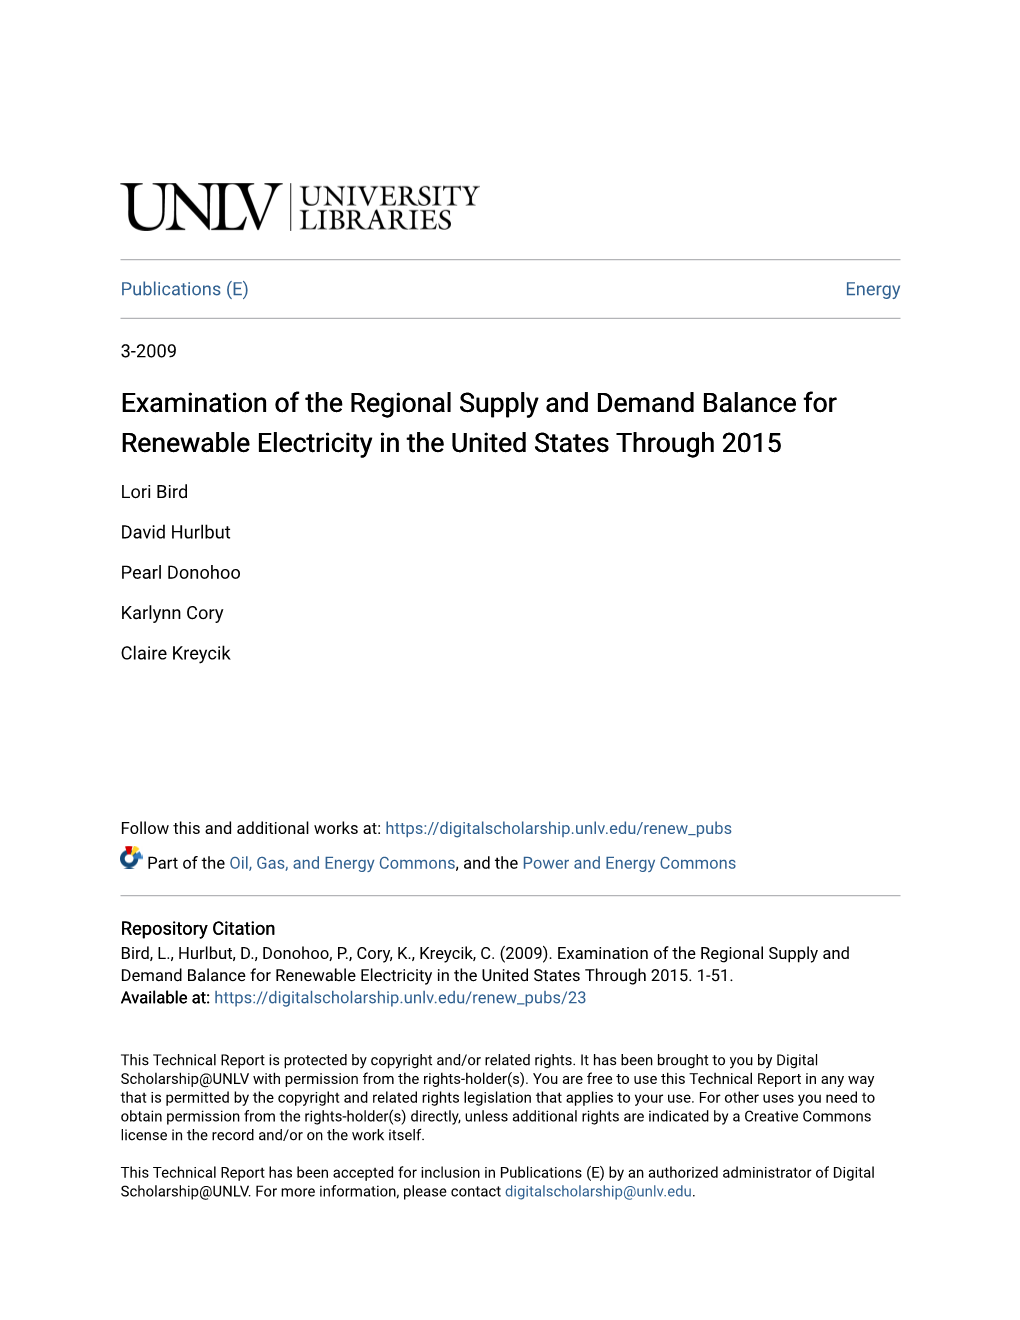 Examination of the Regional Supply and Demand Balance for Renewable Electricity in the United States Through 2015